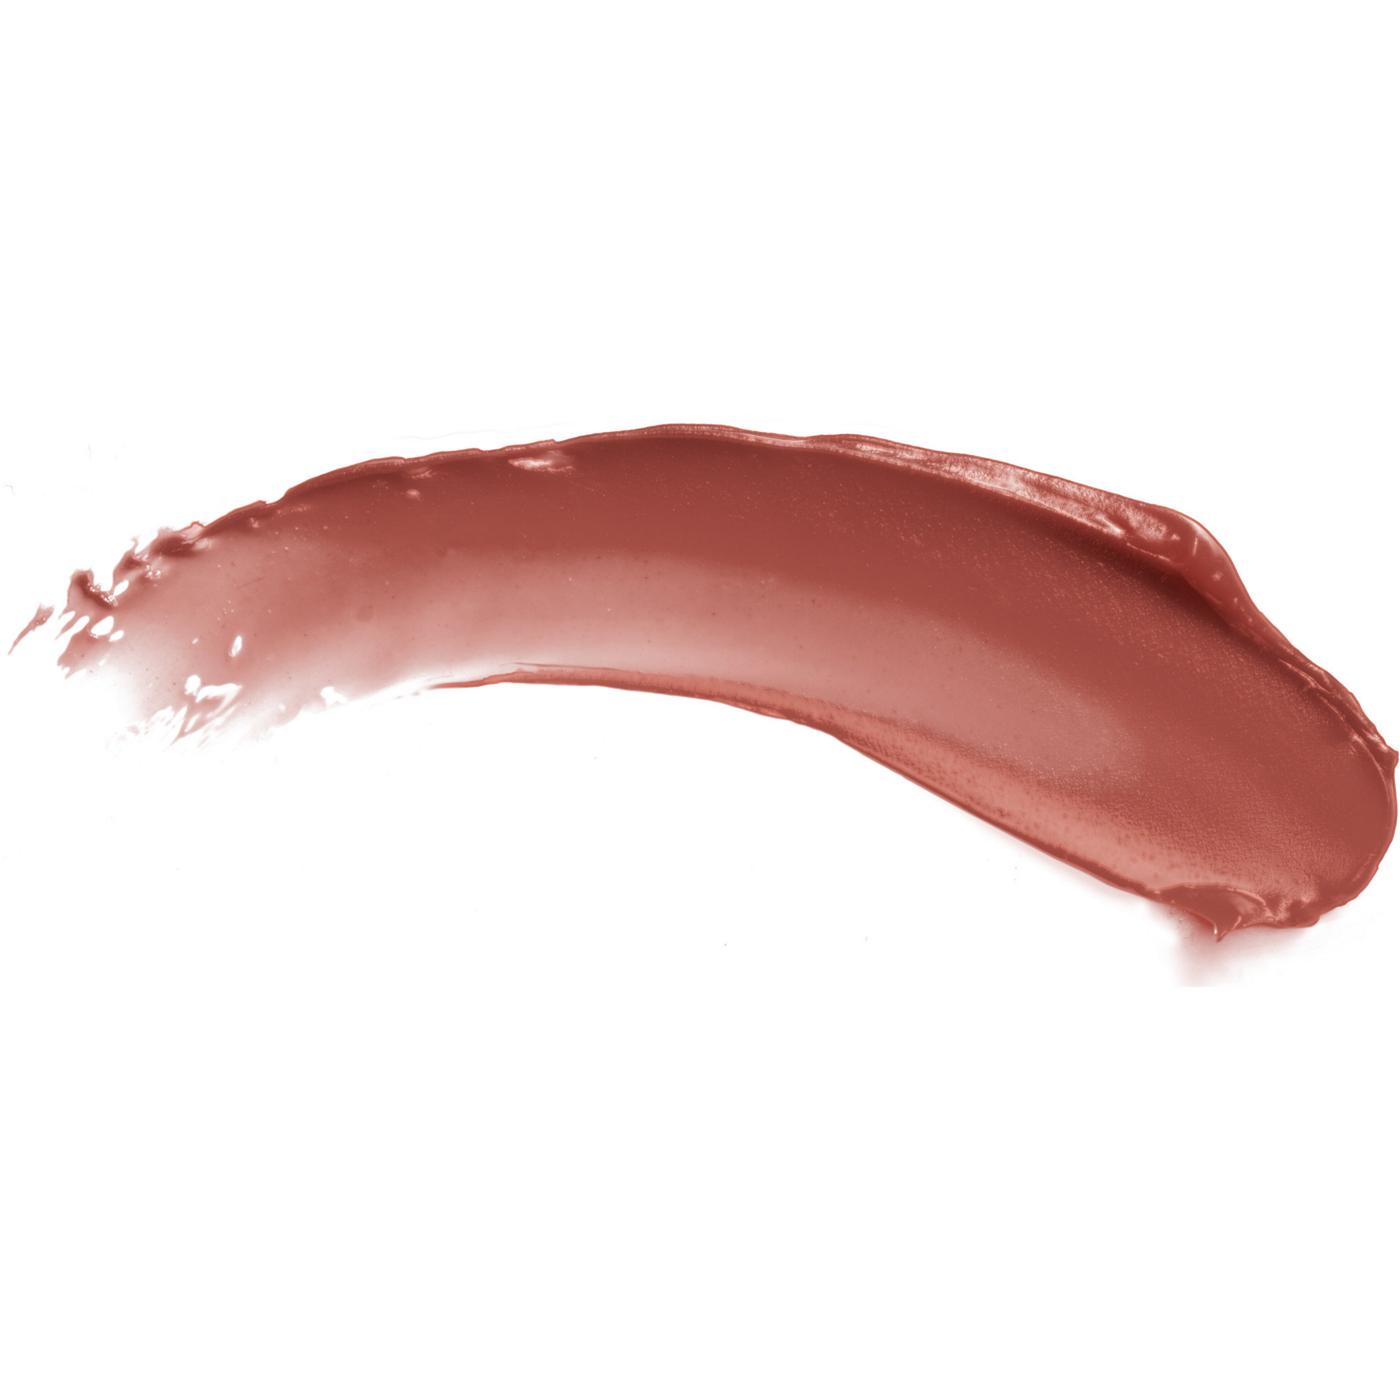 Burt's Bees Squeezy Tinted Balm - Cocoa Crush; image 3 of 7